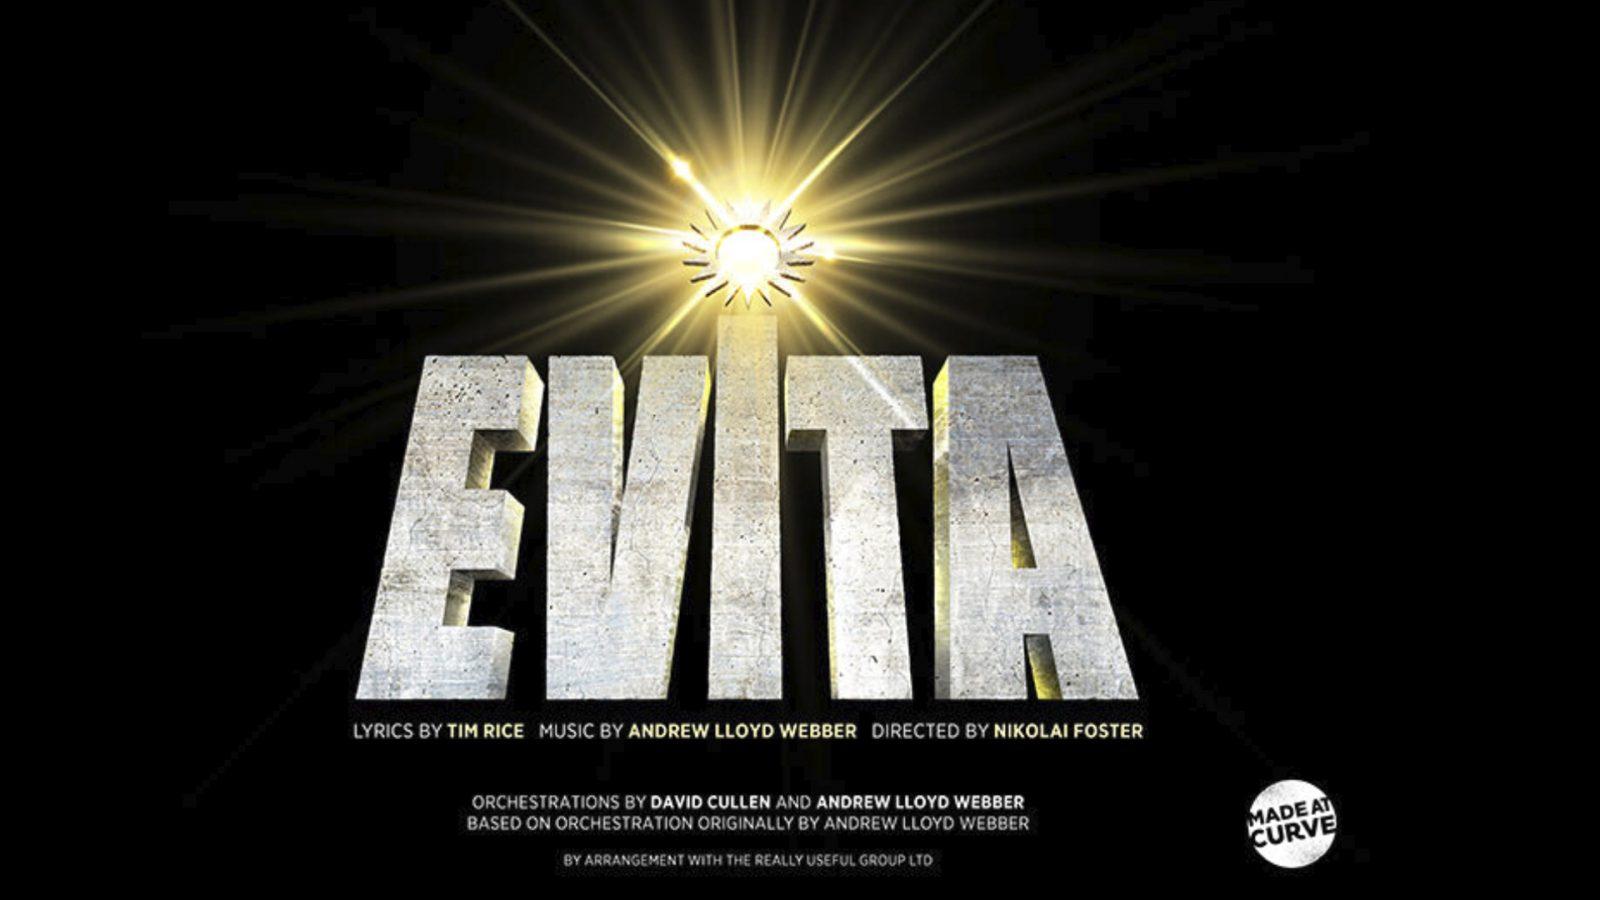 This year, Nikolai Foster directs an unmissable new Made at Curve production of Tim Rice and Andrew Lloyd Webber’s legendary musical, Evita.